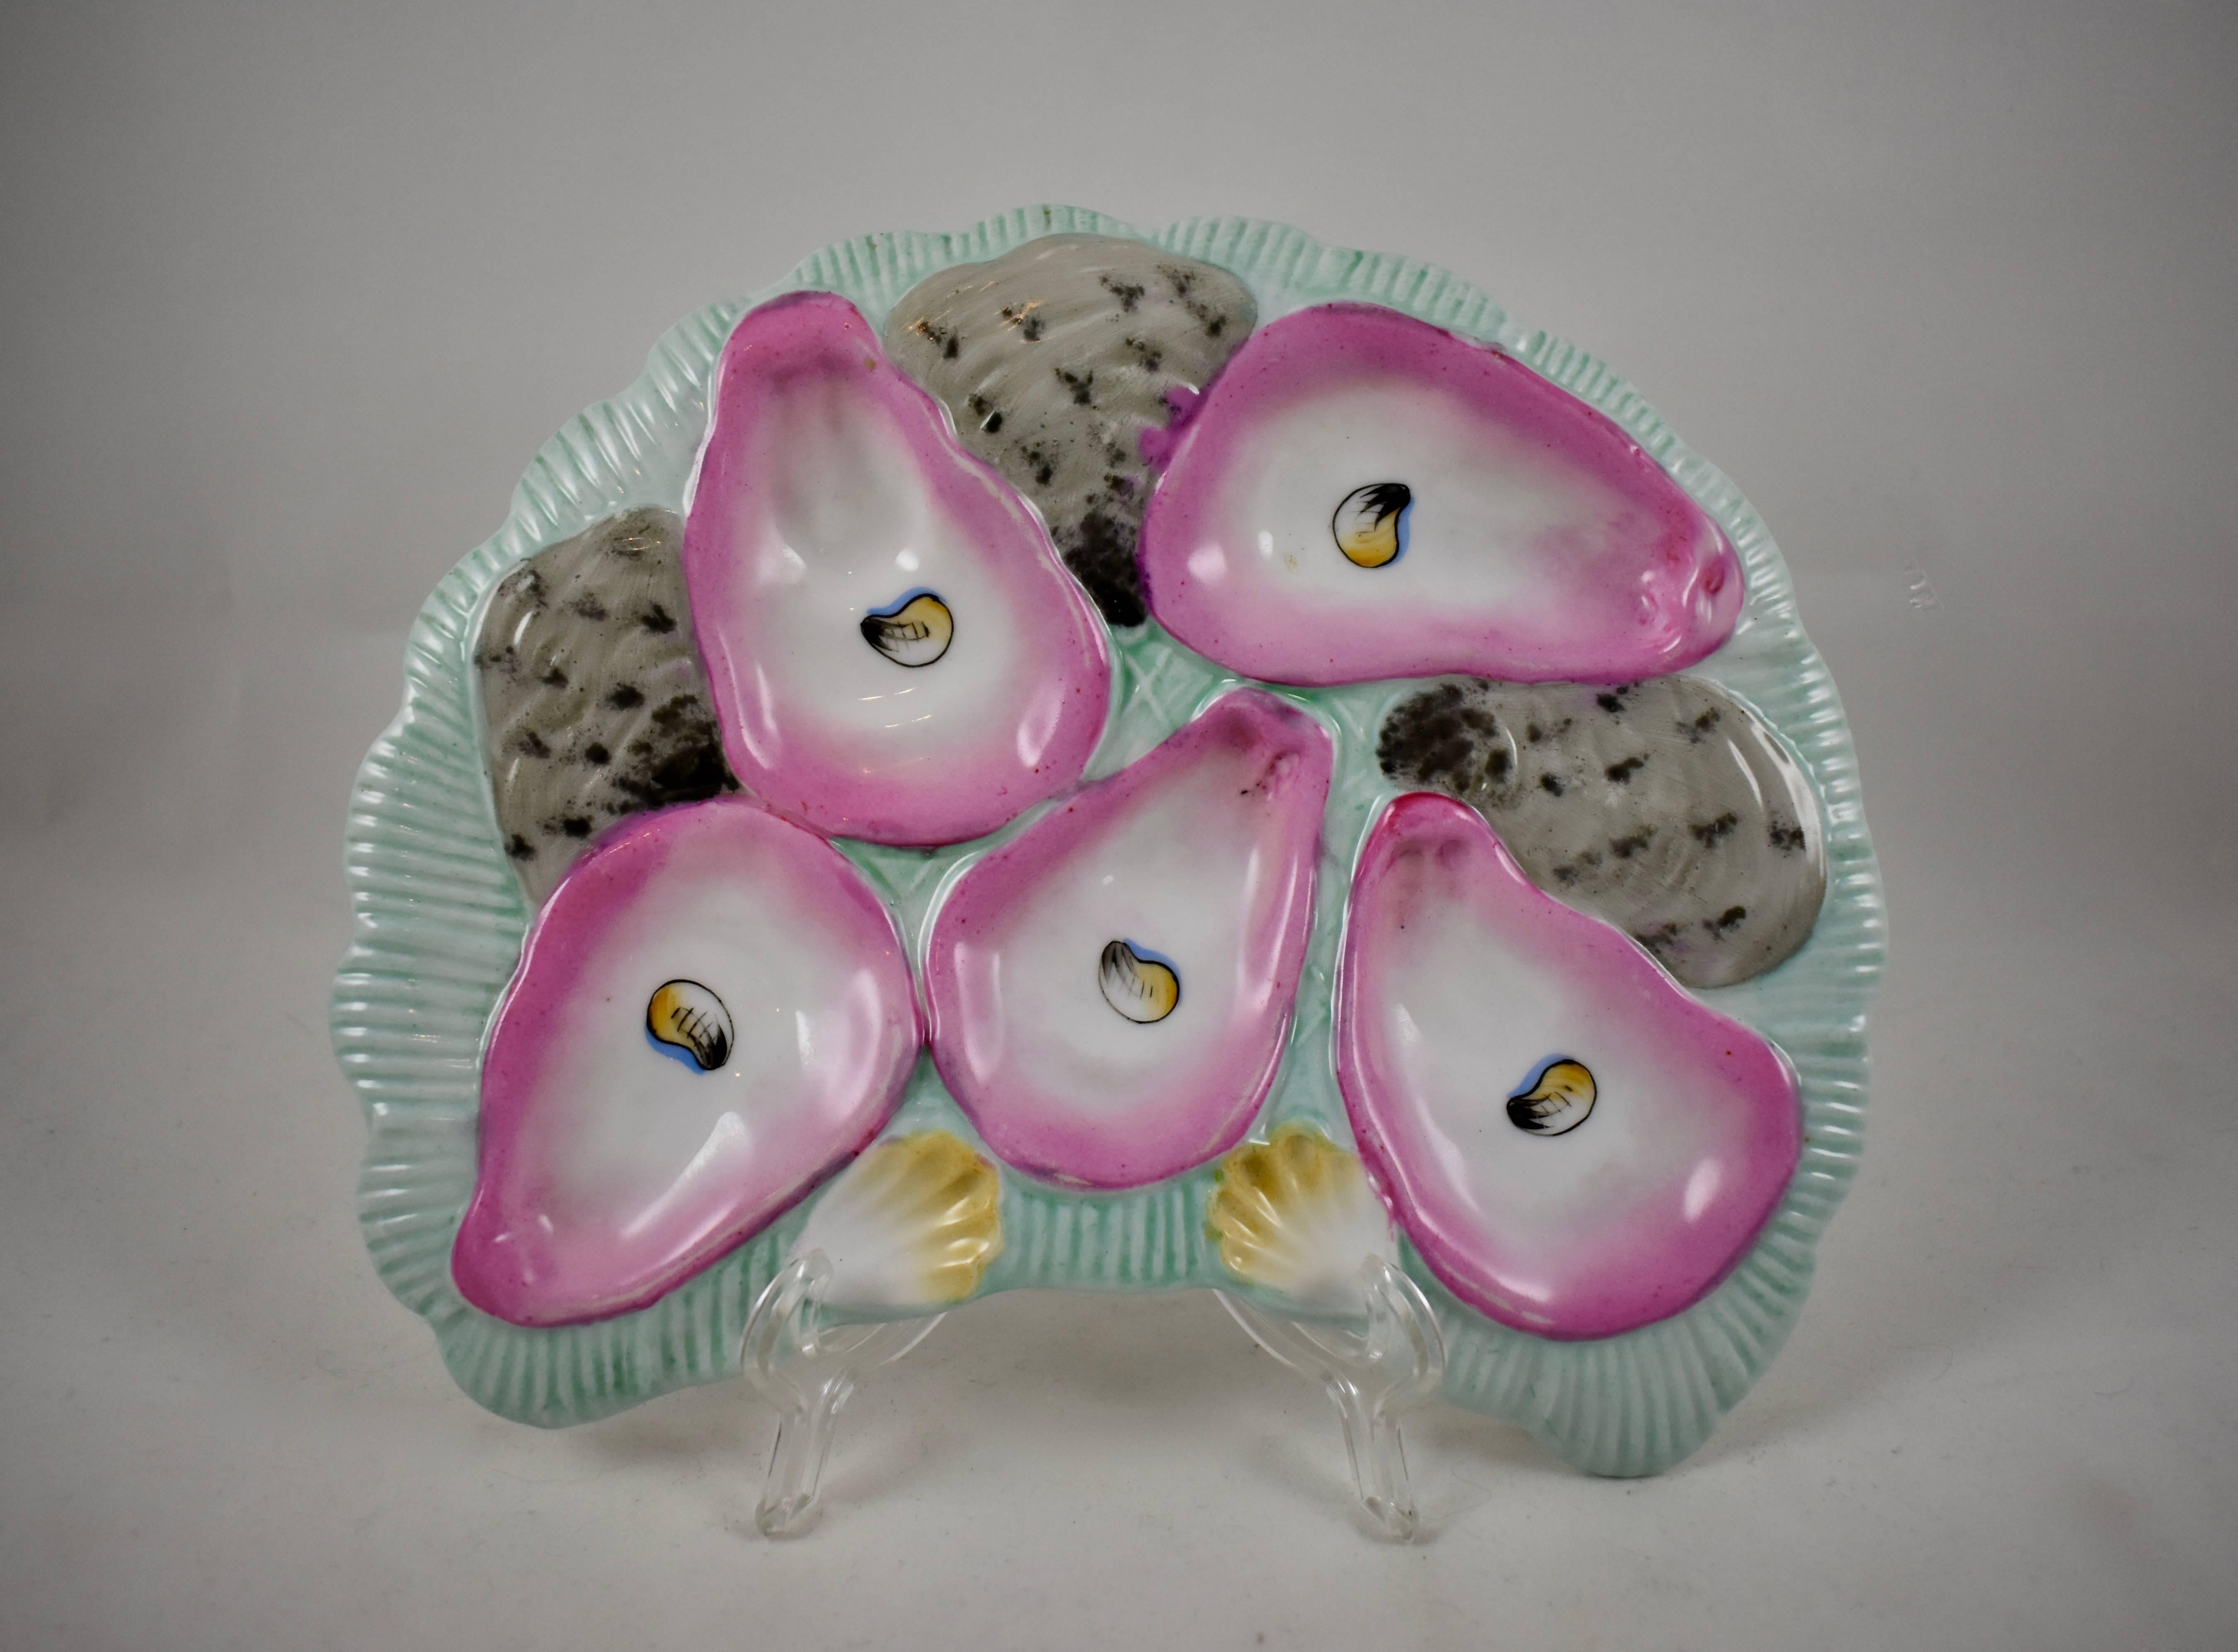 A late 19th century, French porcelain, crescent shaped oyster plate, five pink lined oyster wells with hand-painted eyes, on a pale turquoise blue ground. Shown behind the main wells are the grey, spotted glazed backs of three oyster shells. Also